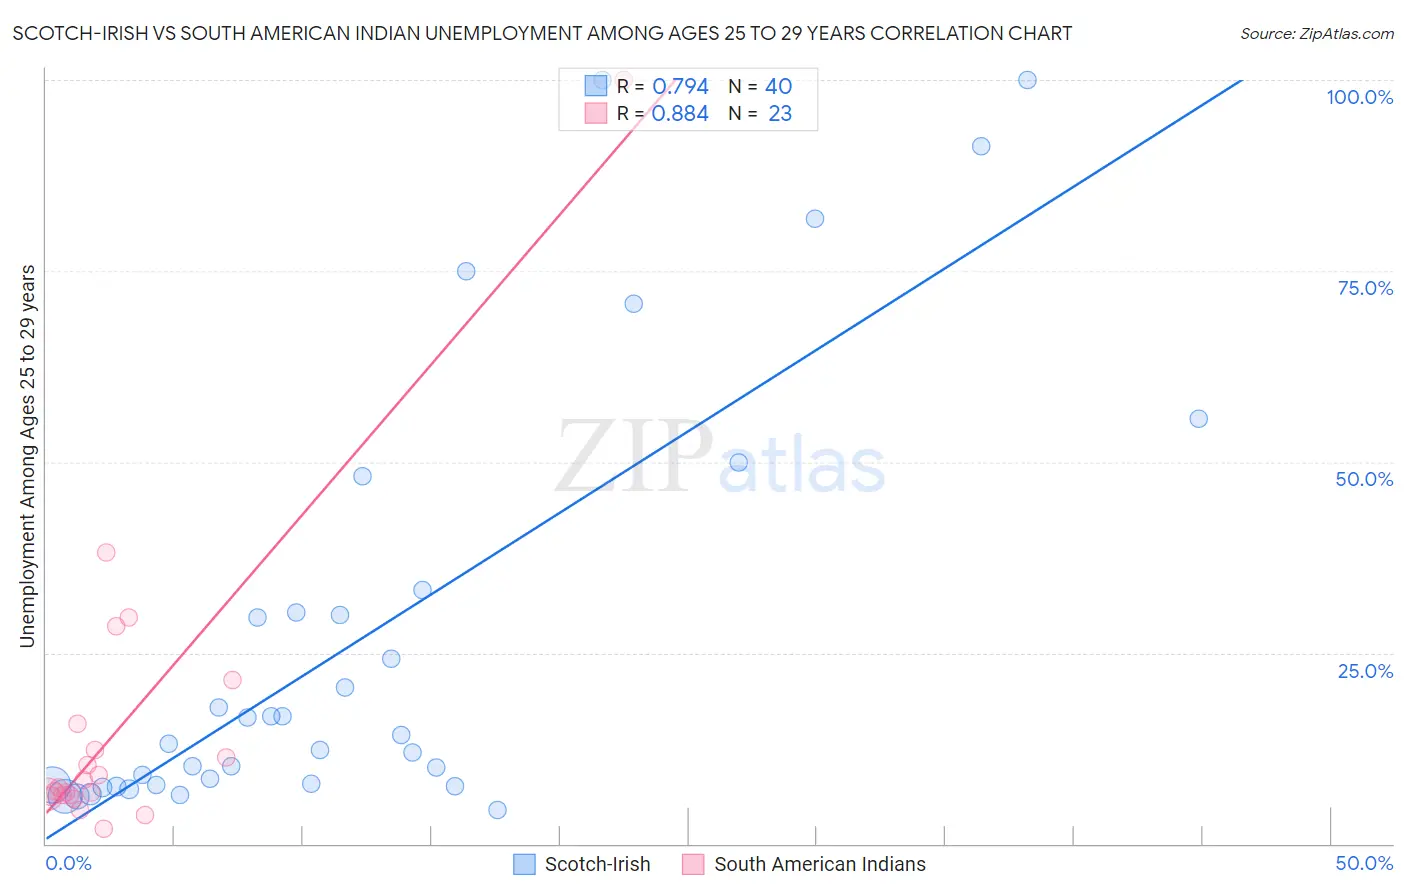 Scotch-Irish vs South American Indian Unemployment Among Ages 25 to 29 years